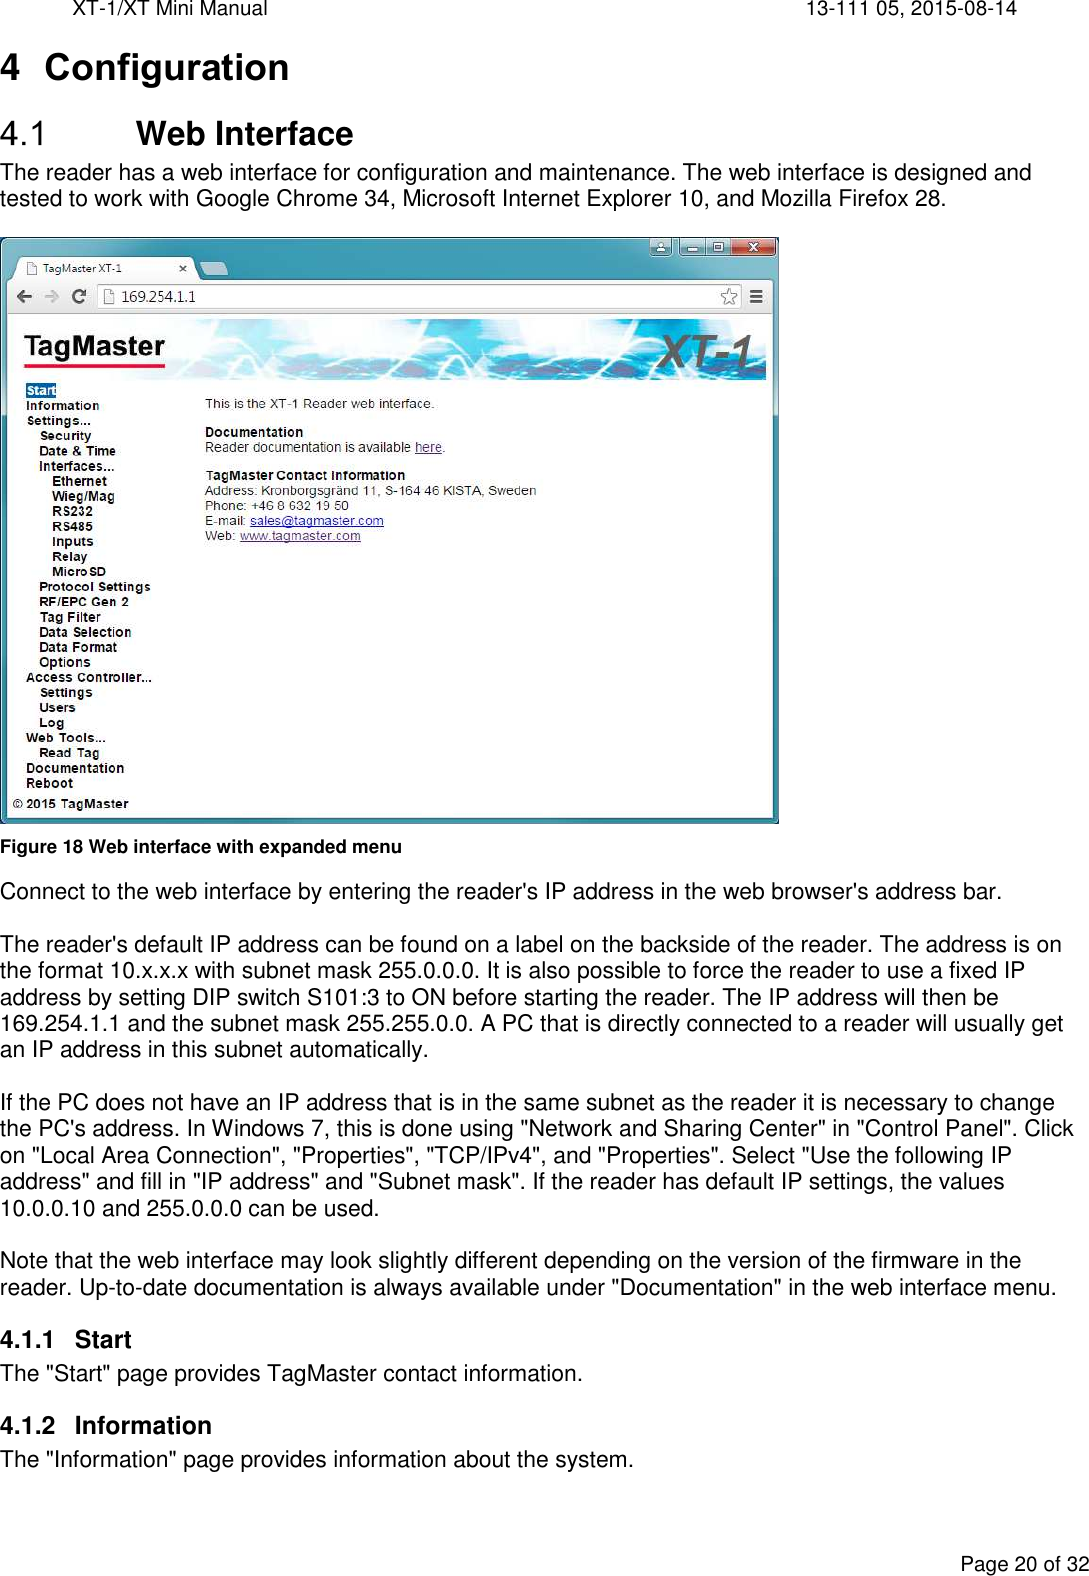 XT-1/XT Mini Manual     13-111 05, 2015-08-14  Page 20 of 32  4  Configuration  Web Interface The reader has a web interface for configuration and maintenance. The web interface is designed and tested to work with Google Chrome 34, Microsoft Internet Explorer 10, and Mozilla Firefox 28.   Figure 18 Web interface with expanded menu Connect to the web interface by entering the reader&apos;s IP address in the web browser&apos;s address bar.   The reader&apos;s default IP address can be found on a label on the backside of the reader. The address is on the format 10.x.x.x with subnet mask 255.0.0.0. It is also possible to force the reader to use a fixed IP address by setting DIP switch S101:3 to ON before starting the reader. The IP address will then be 169.254.1.1 and the subnet mask 255.255.0.0. A PC that is directly connected to a reader will usually get an IP address in this subnet automatically.  If the PC does not have an IP address that is in the same subnet as the reader it is necessary to change the PC&apos;s address. In Windows 7, this is done using &quot;Network and Sharing Center&quot; in &quot;Control Panel&quot;. Click on &quot;Local Area Connection&quot;, &quot;Properties&quot;, &quot;TCP/IPv4&quot;, and &quot;Properties&quot;. Select &quot;Use the following IP address&quot; and fill in &quot;IP address&quot; and &quot;Subnet mask&quot;. If the reader has default IP settings, the values 10.0.0.10 and 255.0.0.0 can be used.  Note that the web interface may look slightly different depending on the version of the firmware in the reader. Up-to-date documentation is always available under &quot;Documentation&quot; in the web interface menu. 4.1.1  Start The &quot;Start&quot; page provides TagMaster contact information. 4.1.2  Information The &quot;Information&quot; page provides information about the system. 